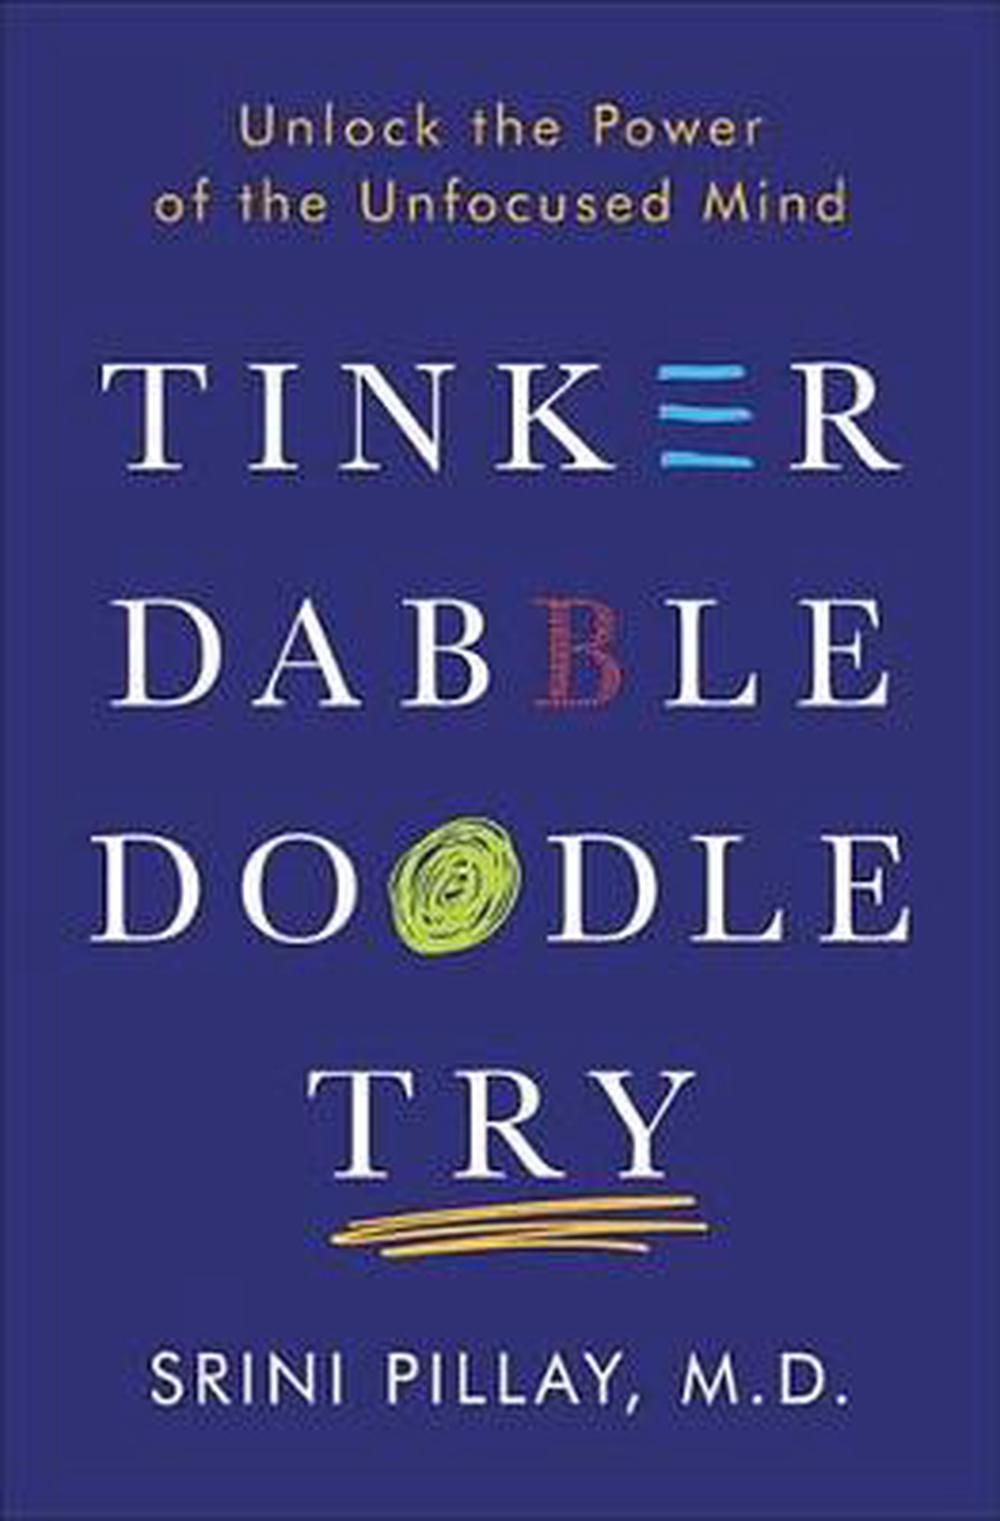 tinker dabble doodle try review